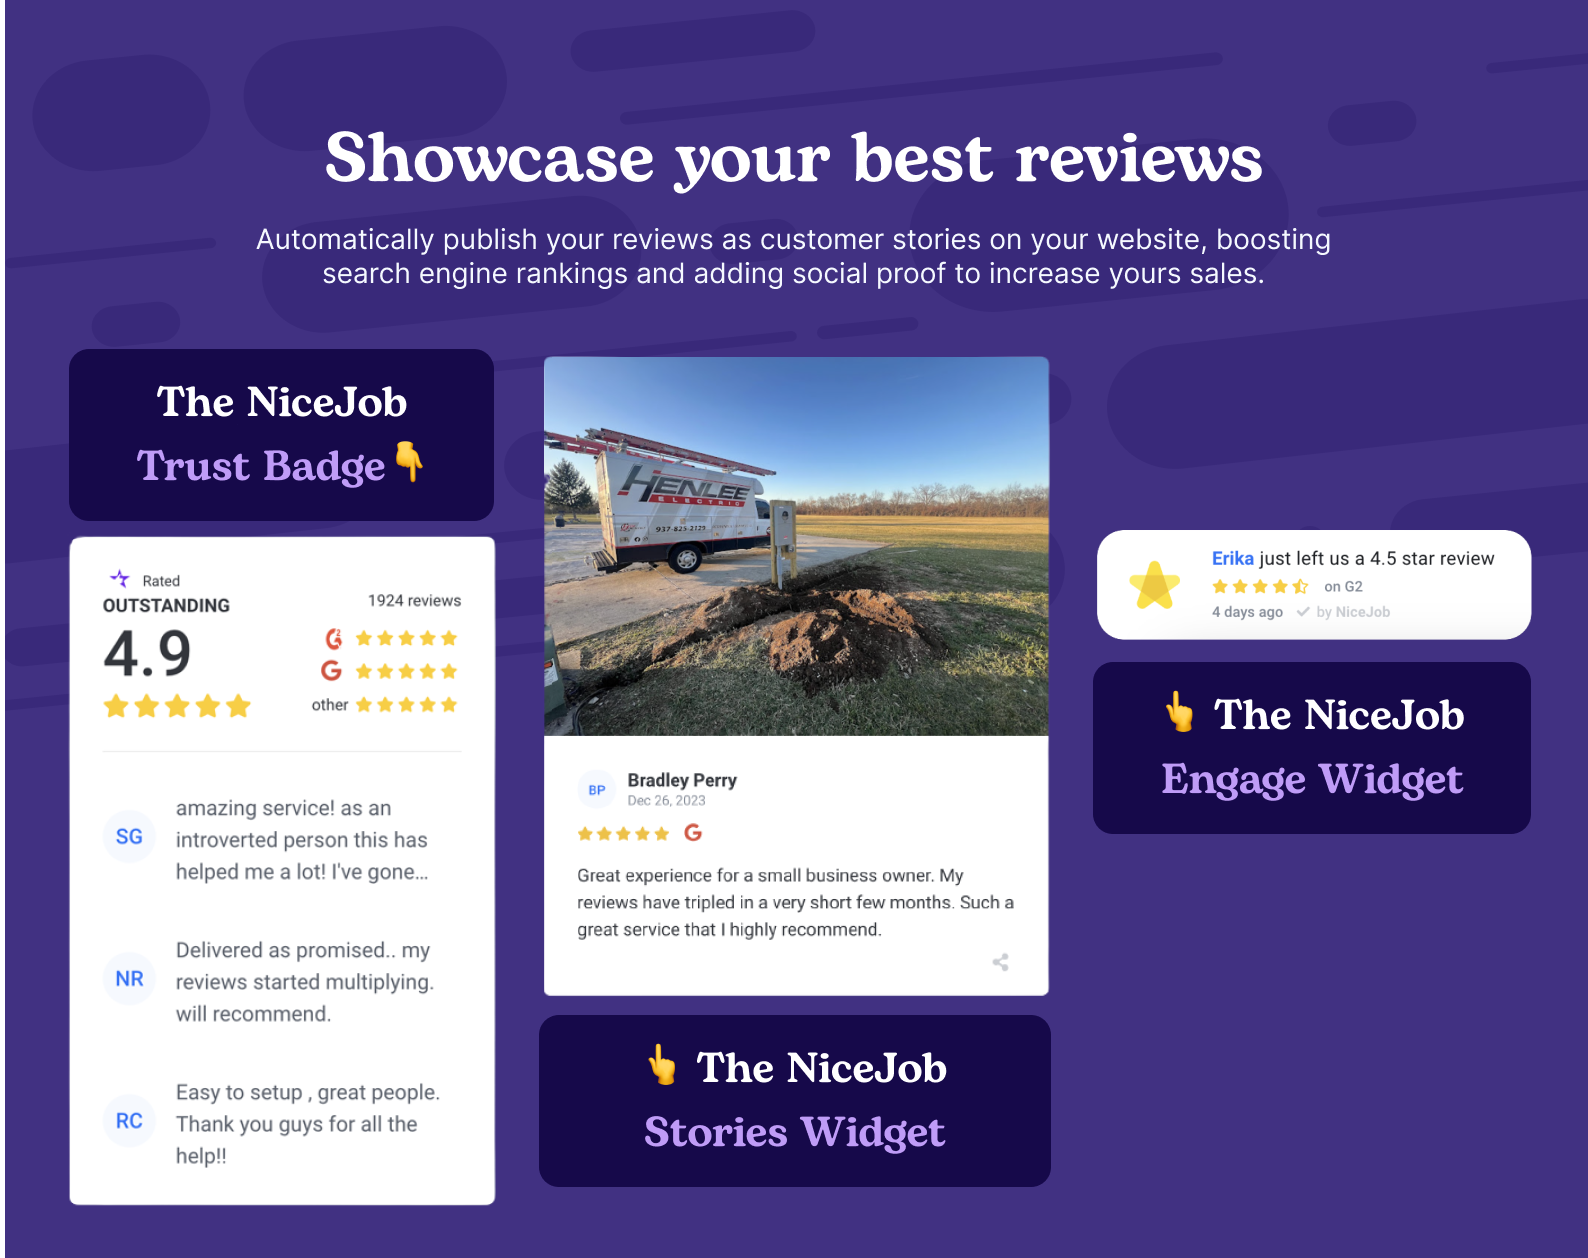 Display your 5-star reviews on your website with our free widgets.